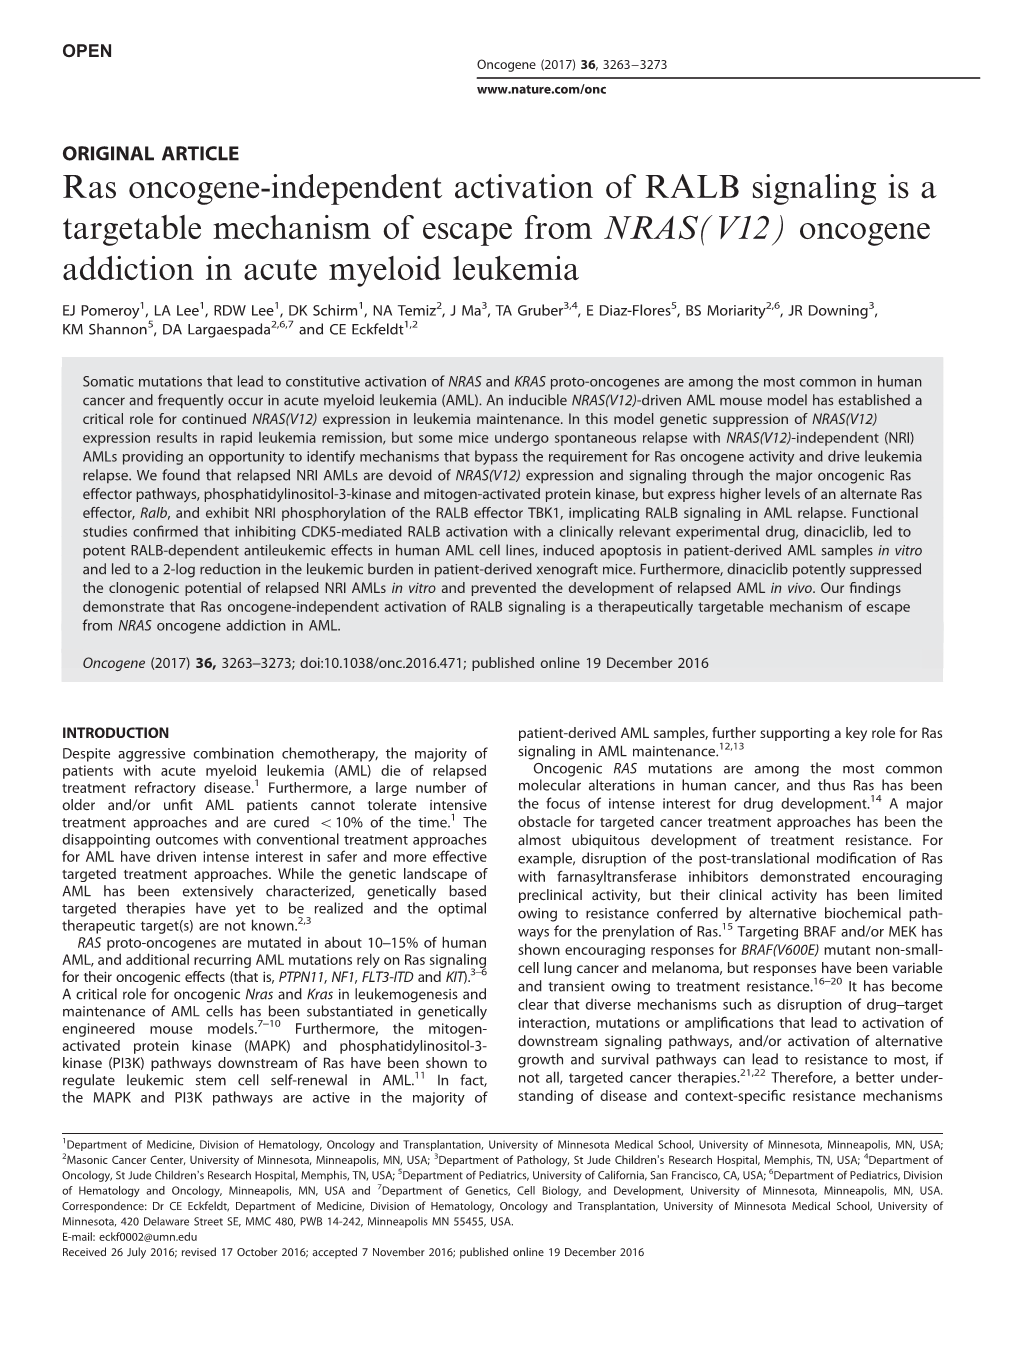 Ras Oncogene-Independent Activation of RALB Signaling Is a Targetable Mechanism of Escape from NRAS(V12) Oncogene Addiction in Acute Myeloid Leukemia